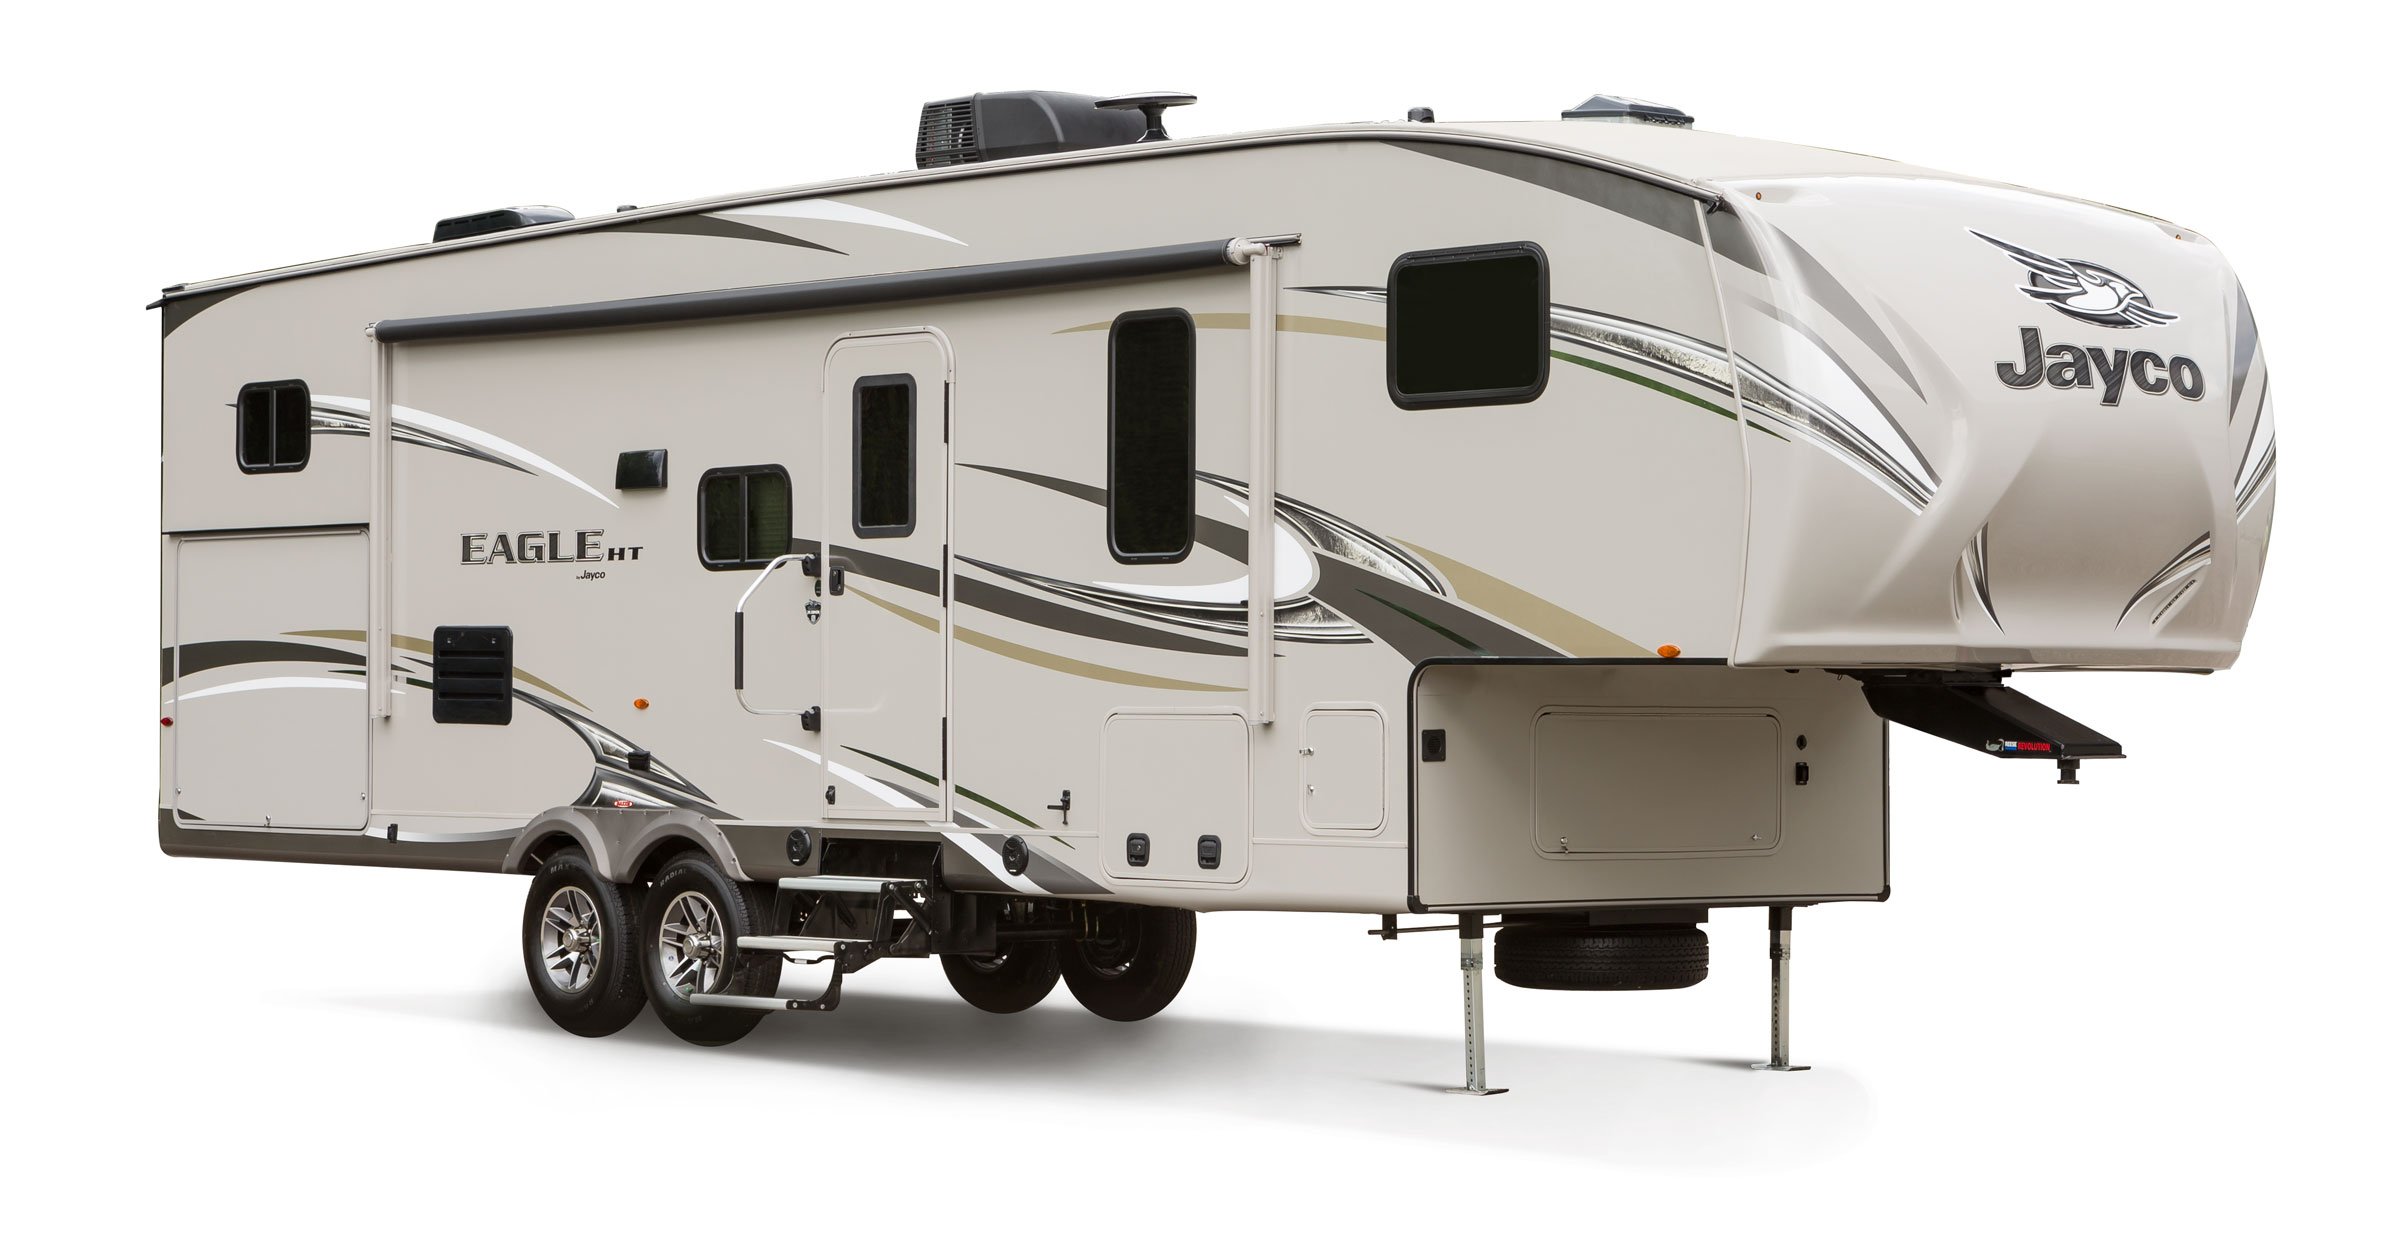 Jayco Eagle HTX for Winter Camping